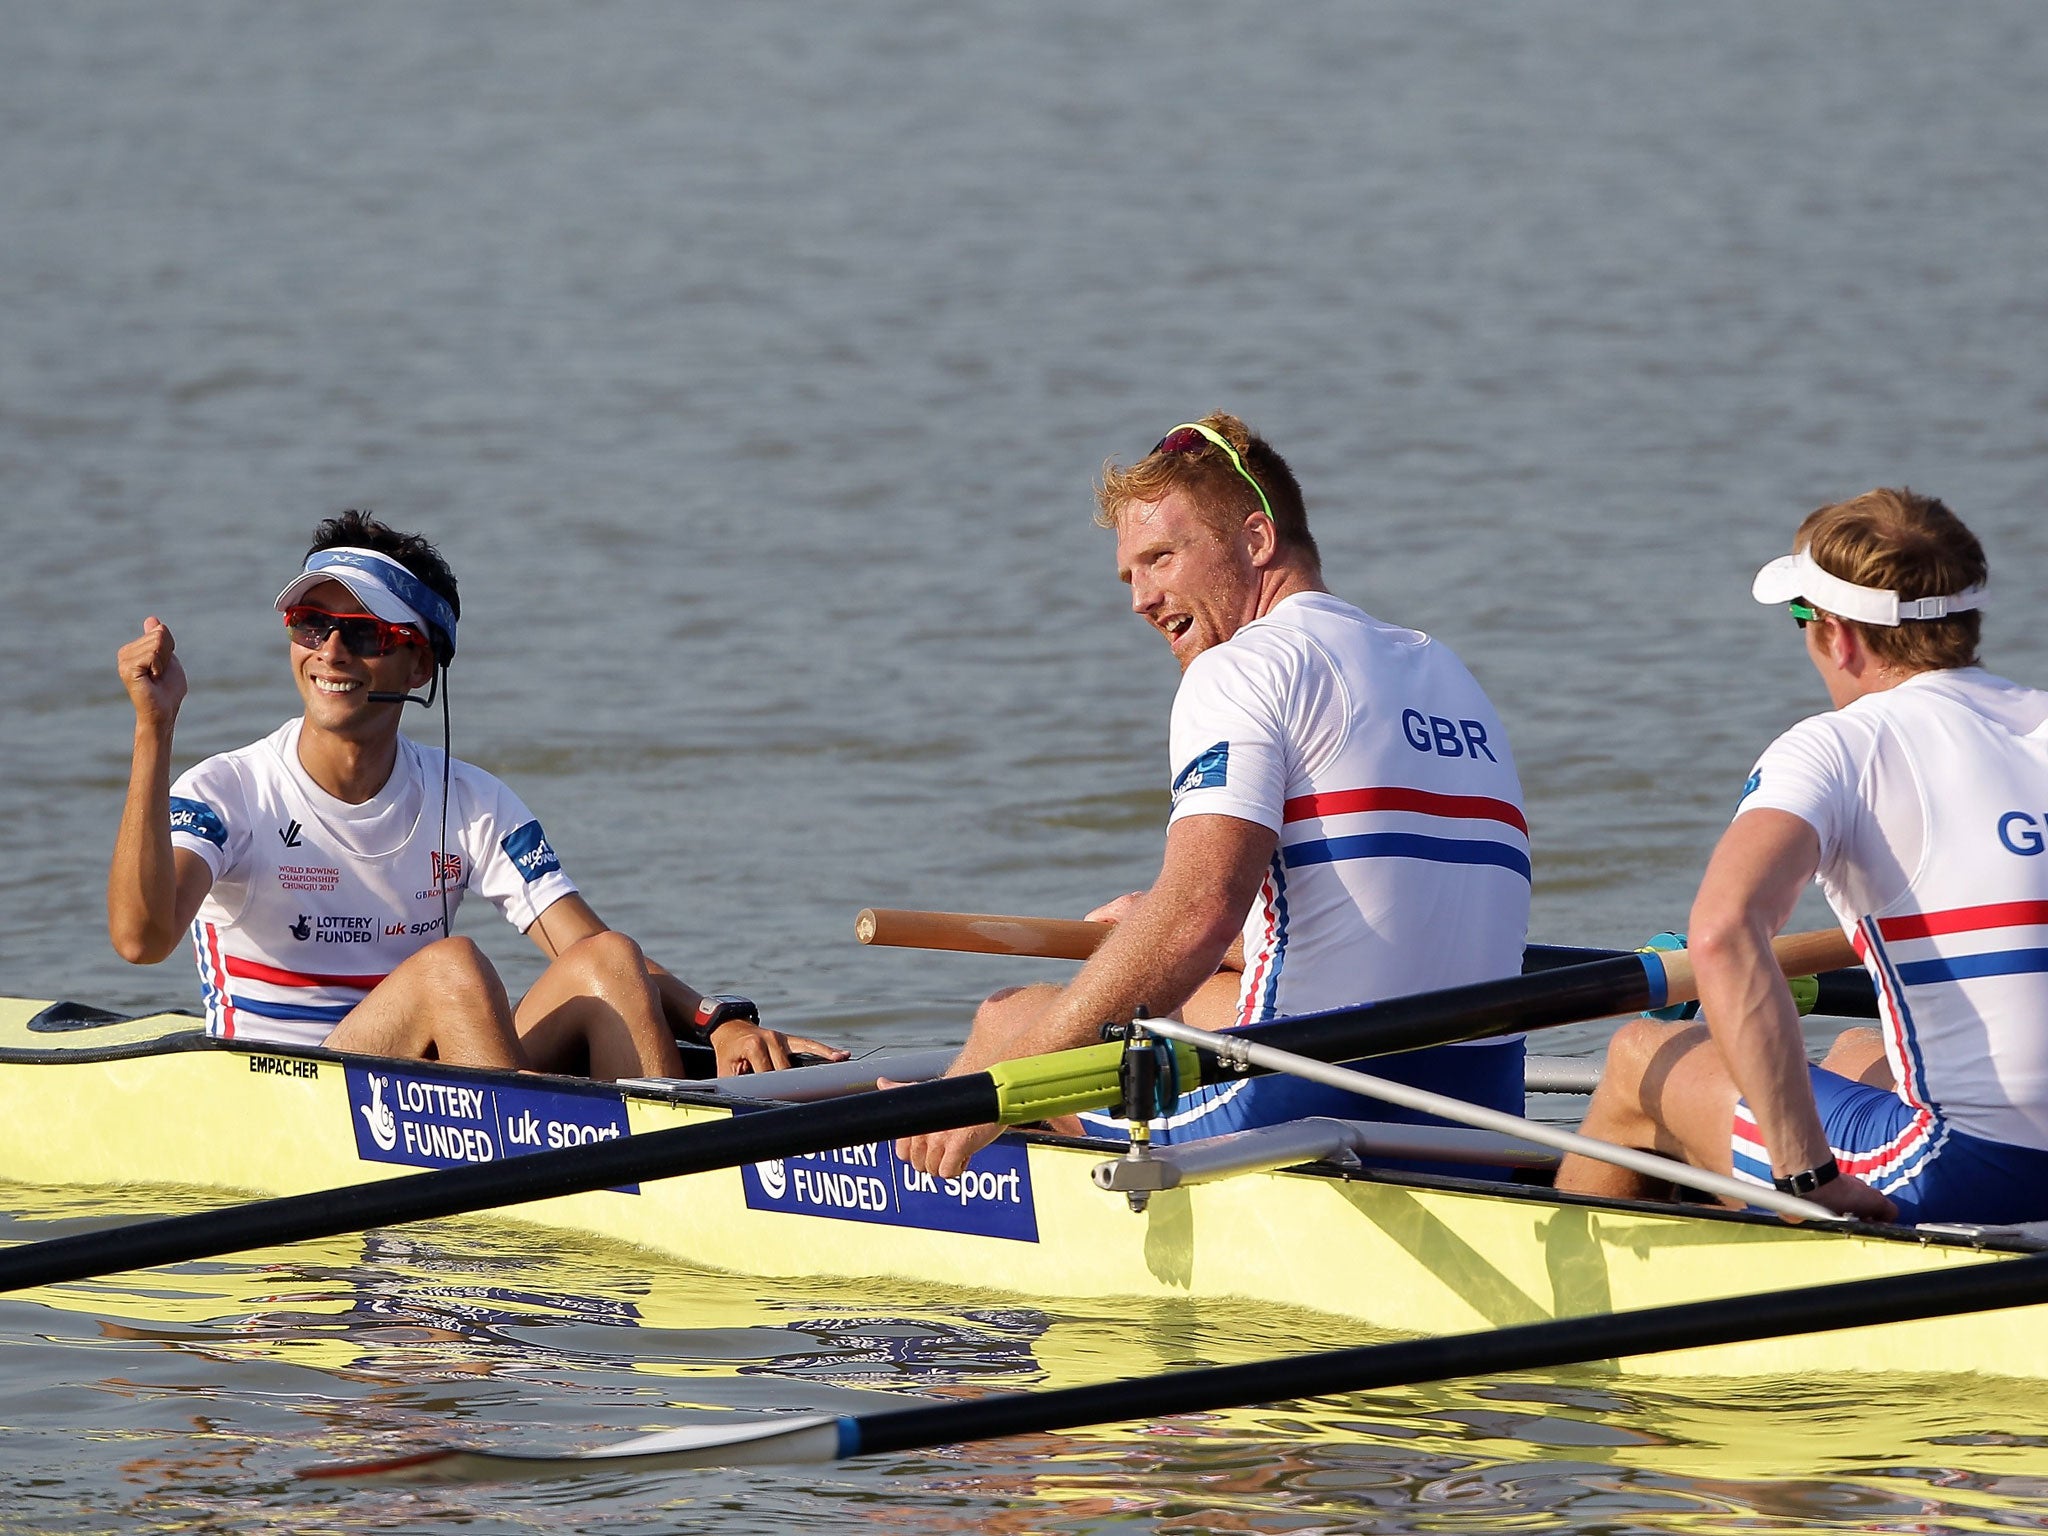 Great Britain ended a successful World Championships in Chengdu by taking their first-ever gold medal in the men's eight event